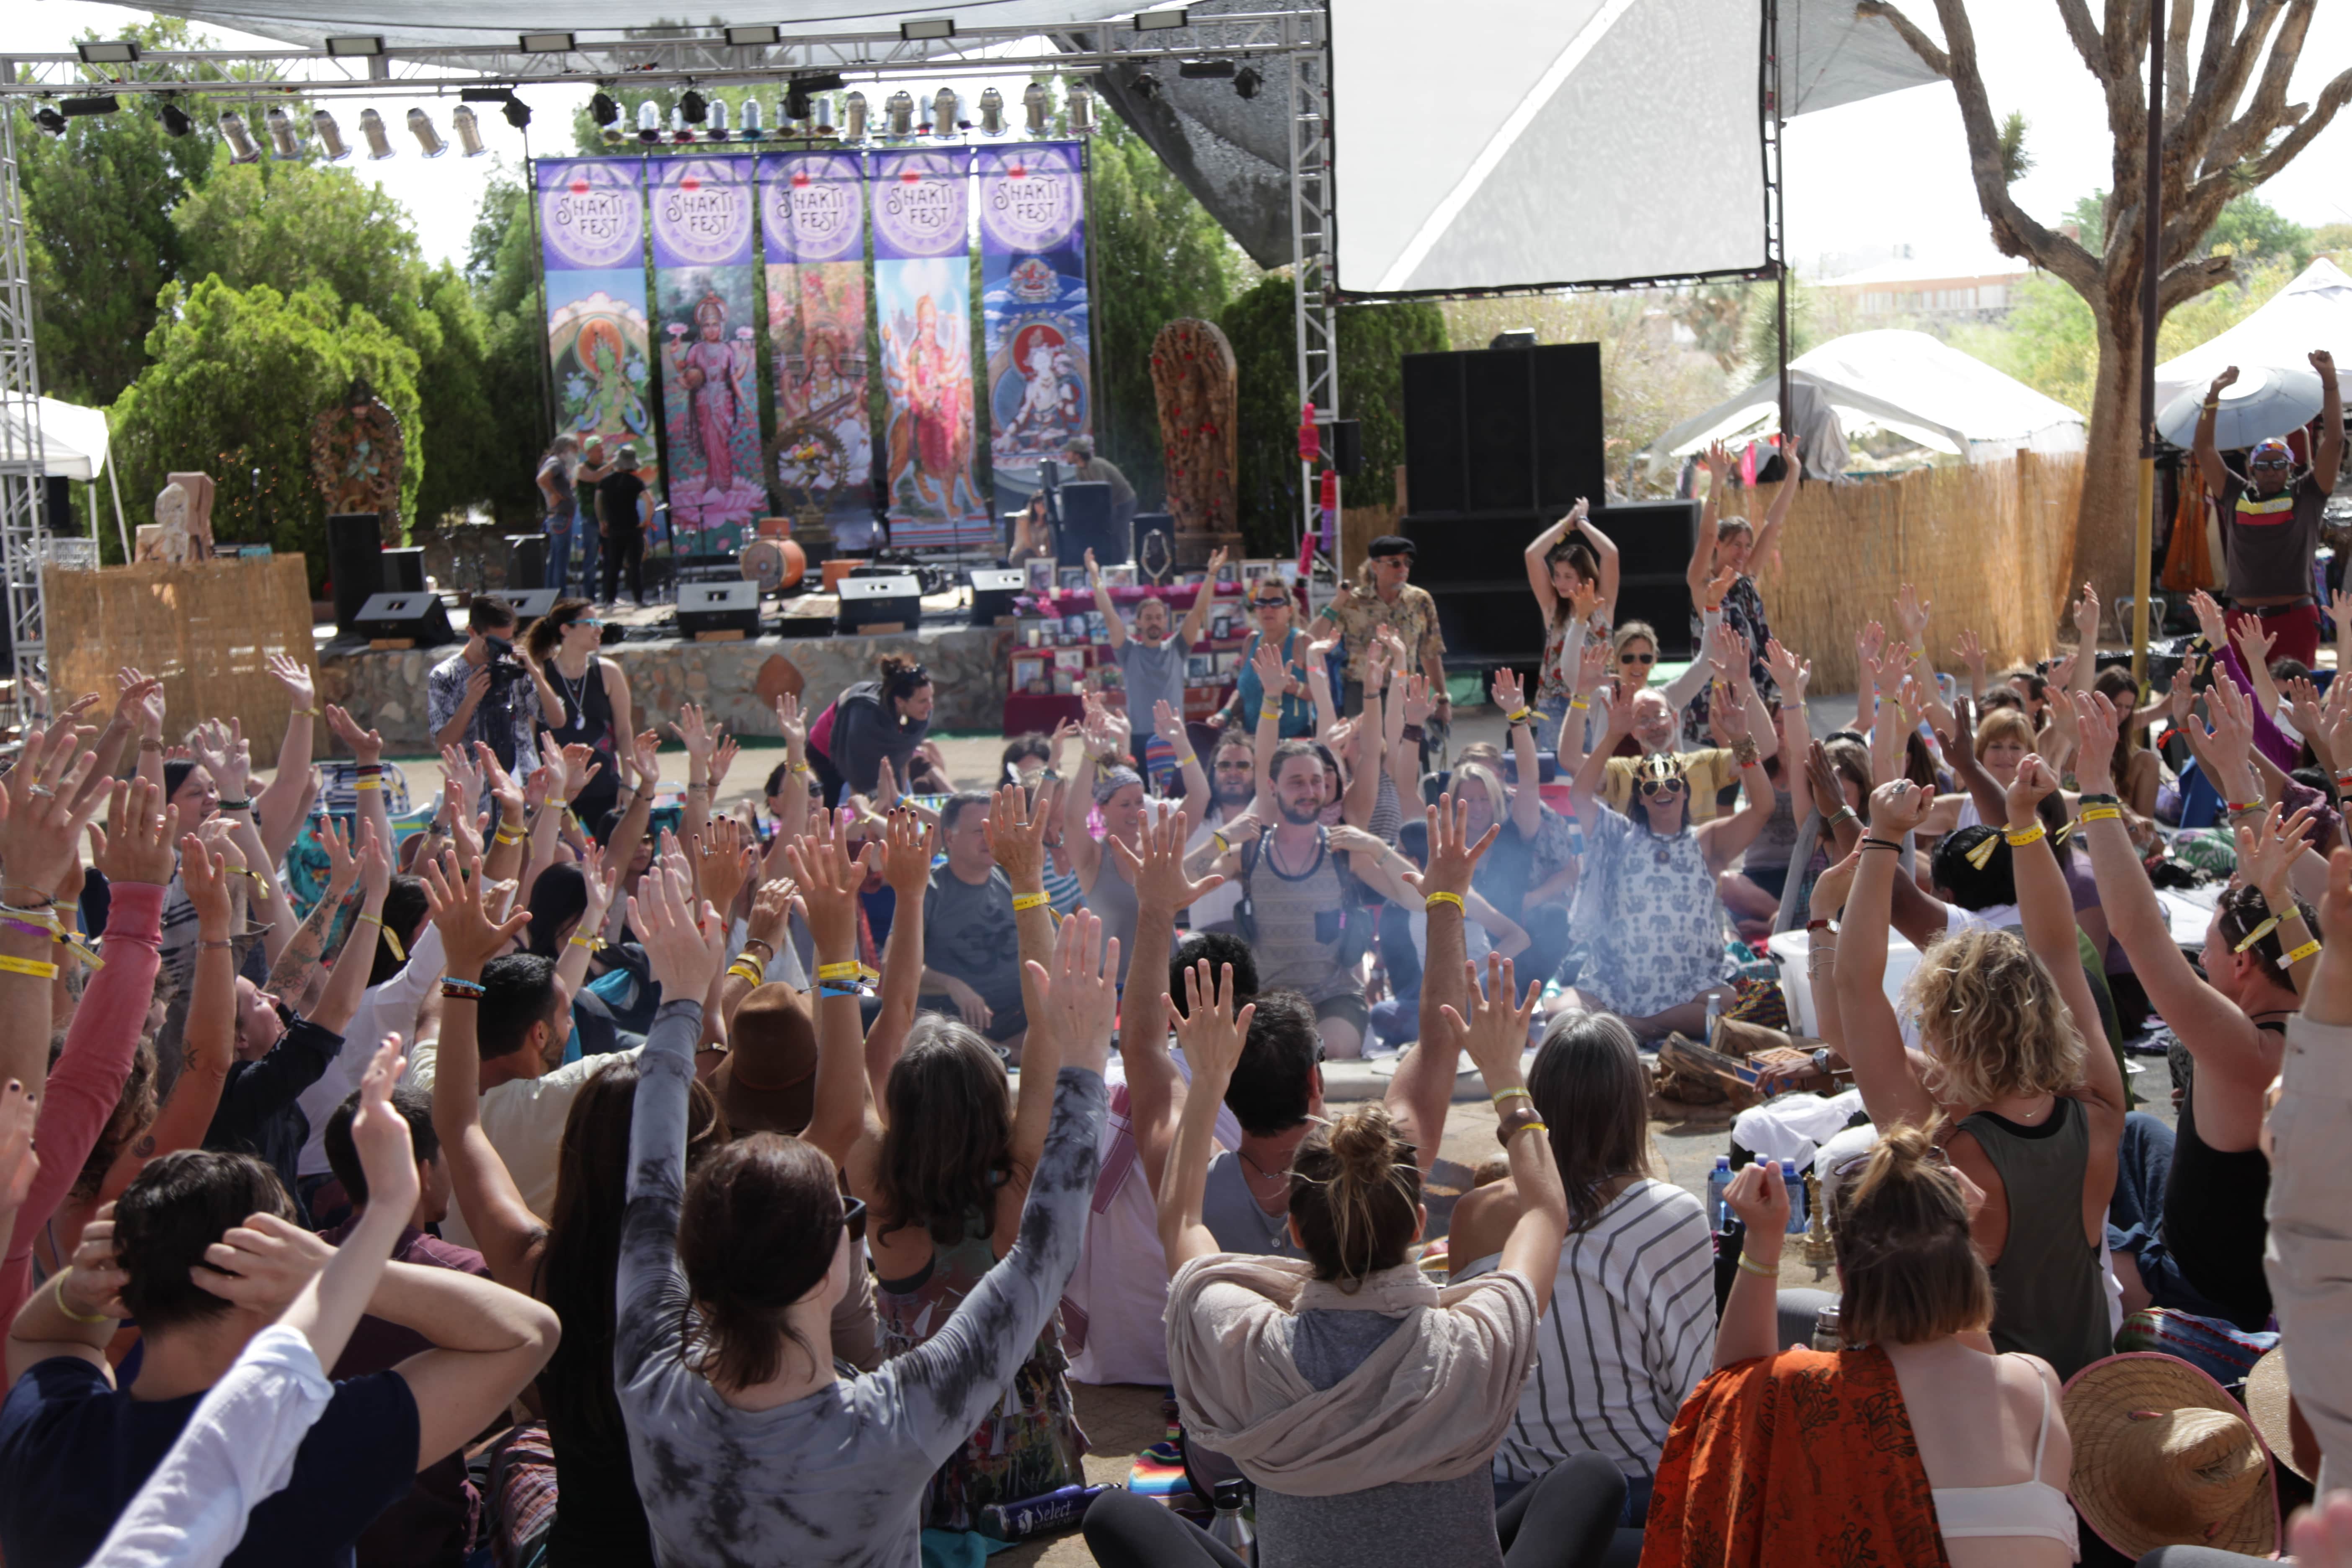 Win two tickets to the Bhakti Fest 10th Anniversary Celebration! Everfest